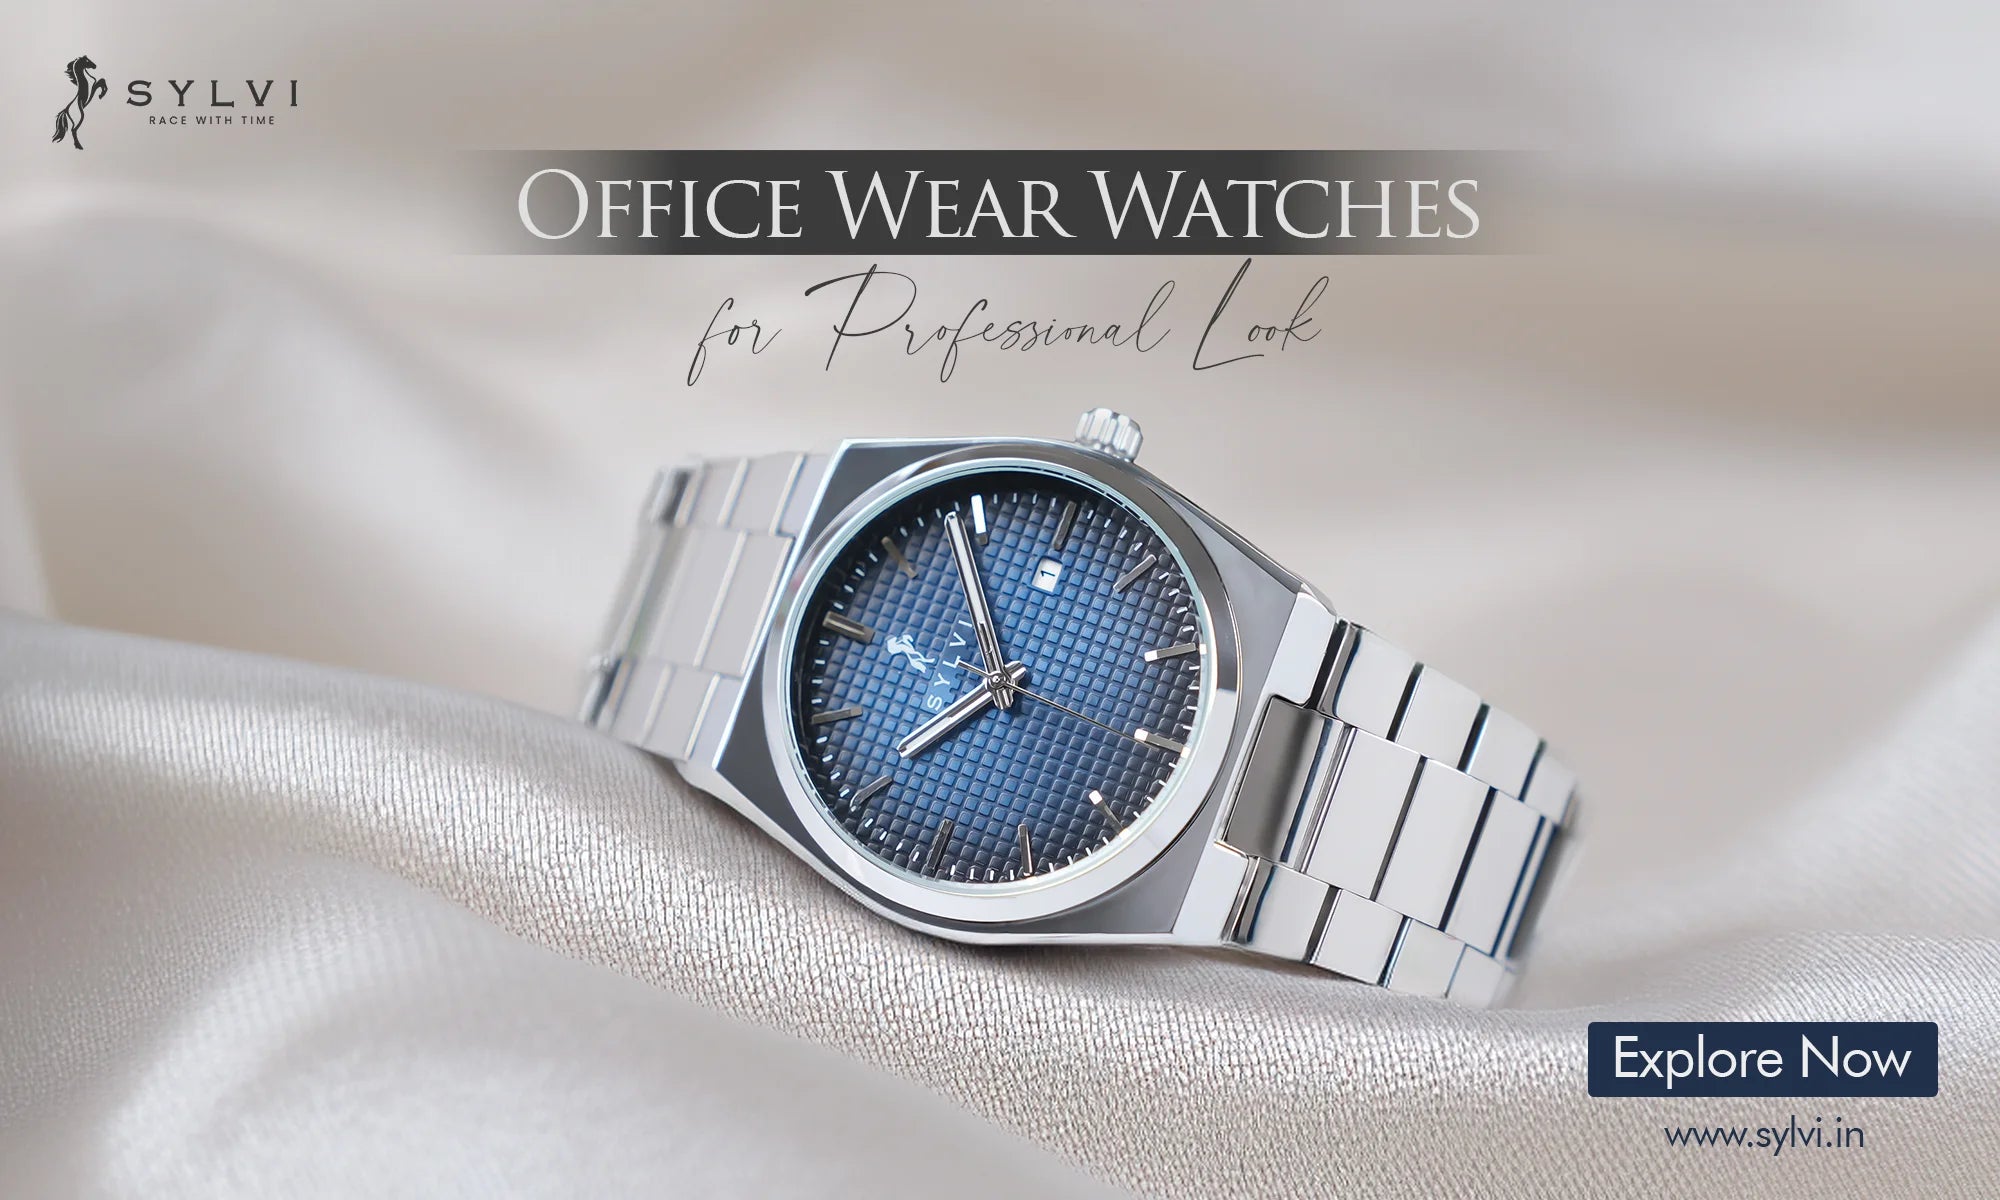 Top Office Wear Watches For Professional Look| Shop Now at Sylvi